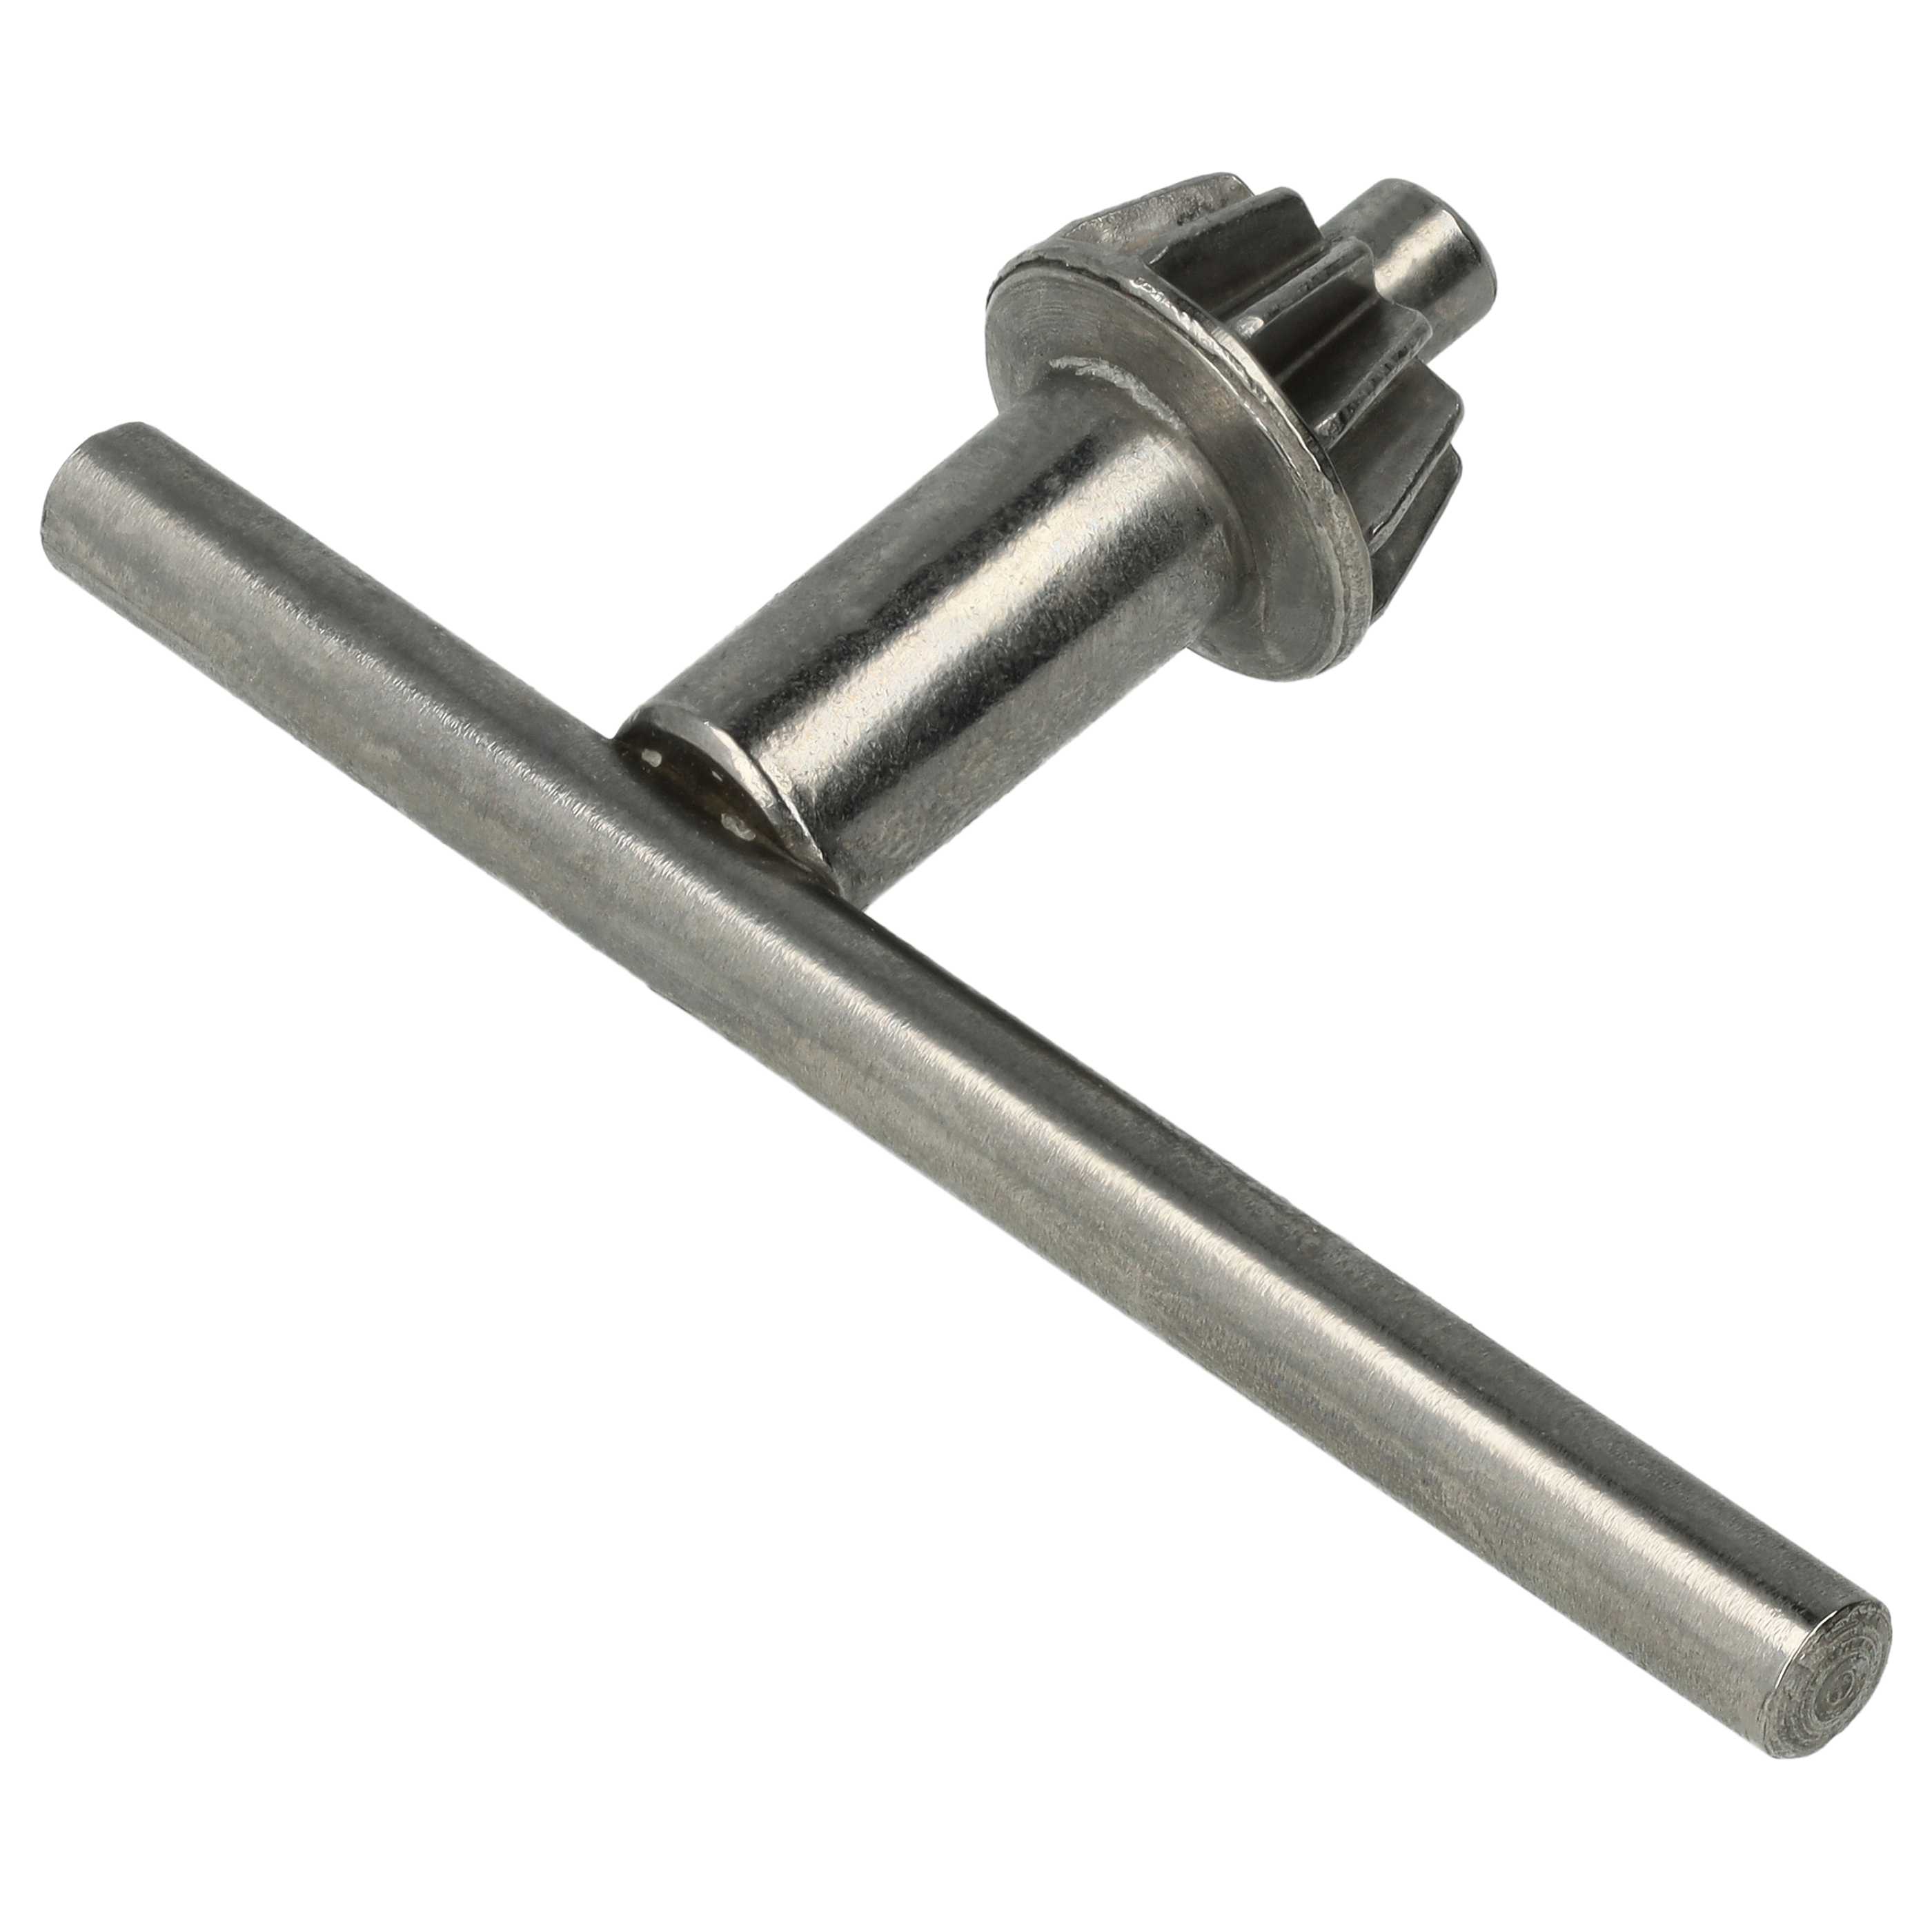 Drill Chuck Key S2A 10-13mm replaces Wolfcraft 2630000 for Drills from e.g. Metabo, AEG